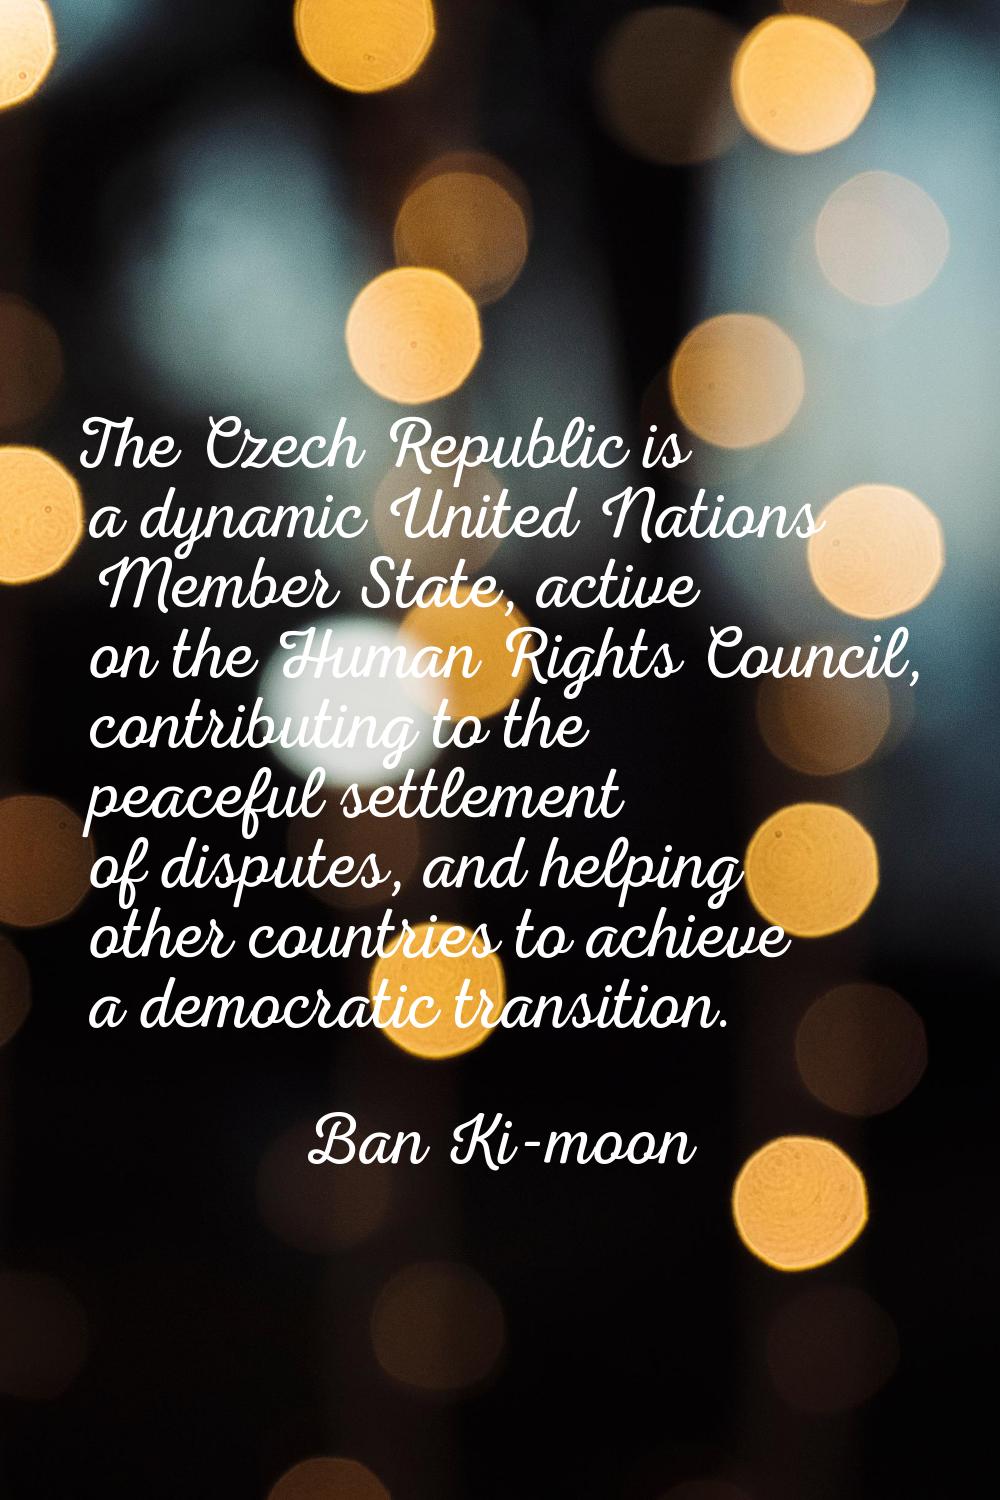 The Czech Republic is a dynamic United Nations Member State, active on the Human Rights Council, co